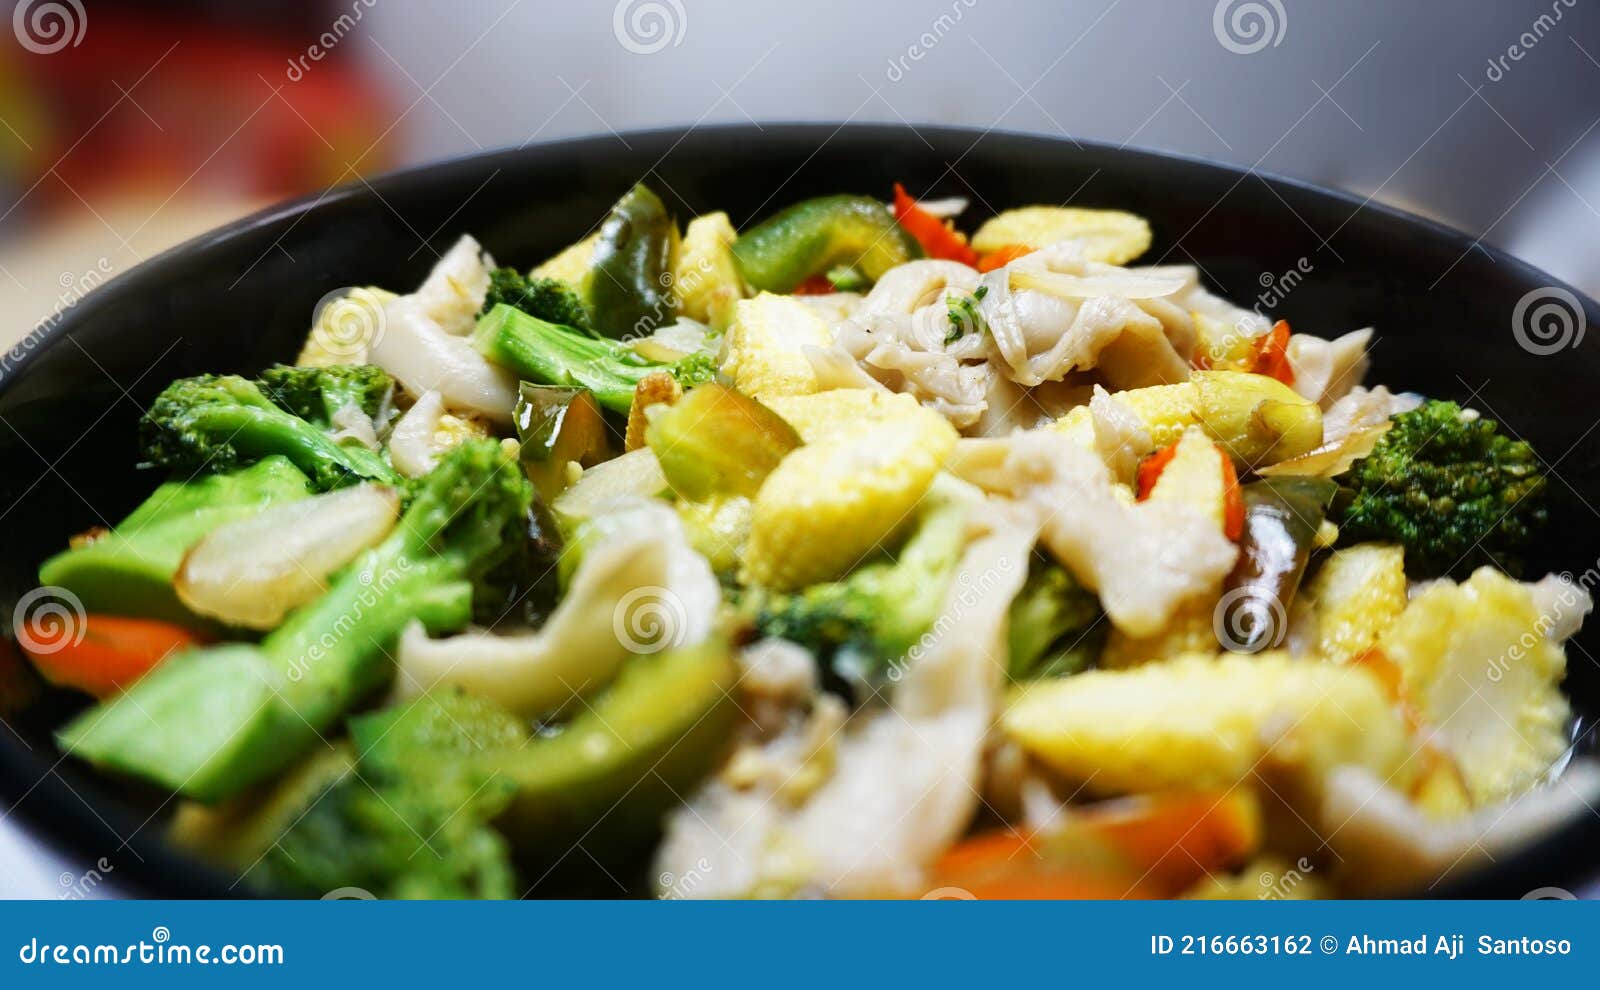 vegetable capcay young corn with mushrooms and also peppers seen up close squatted black color with kater striped blur